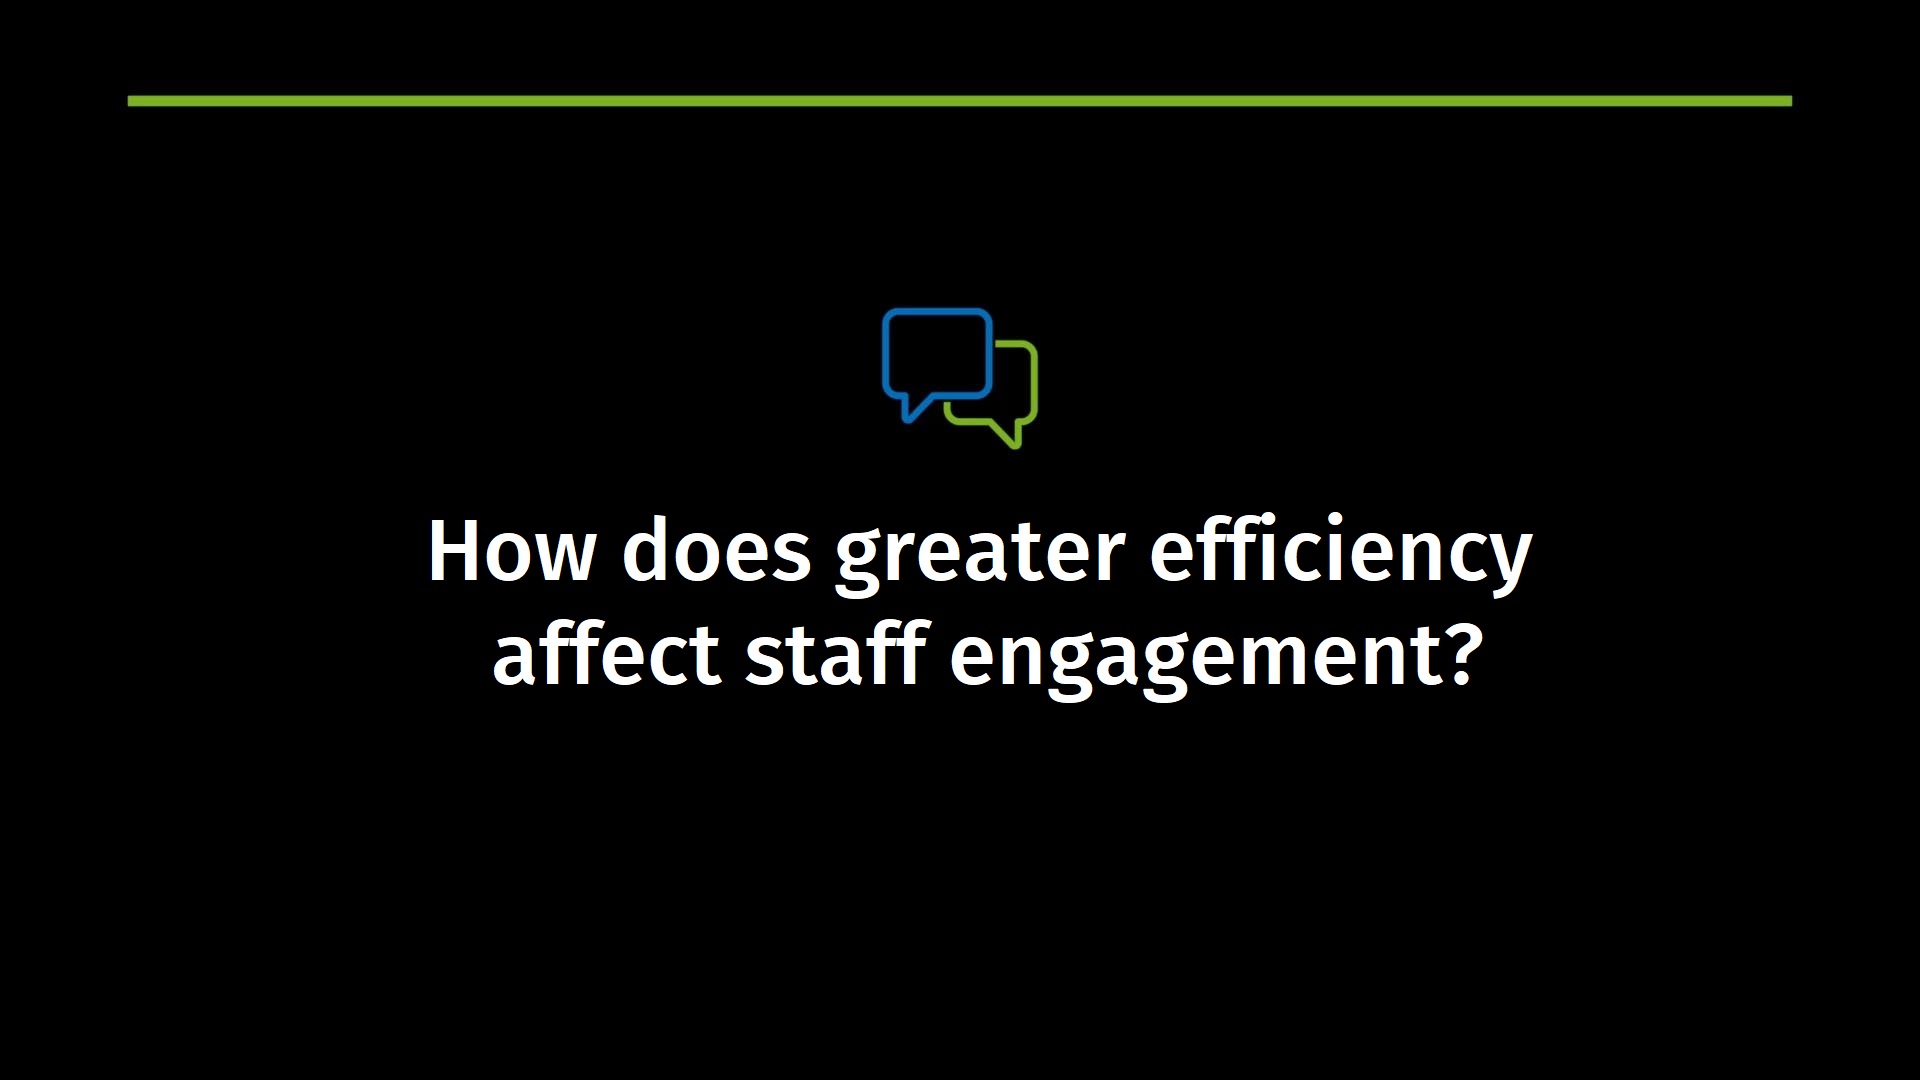 How does greater efficiency affect staff engagement?